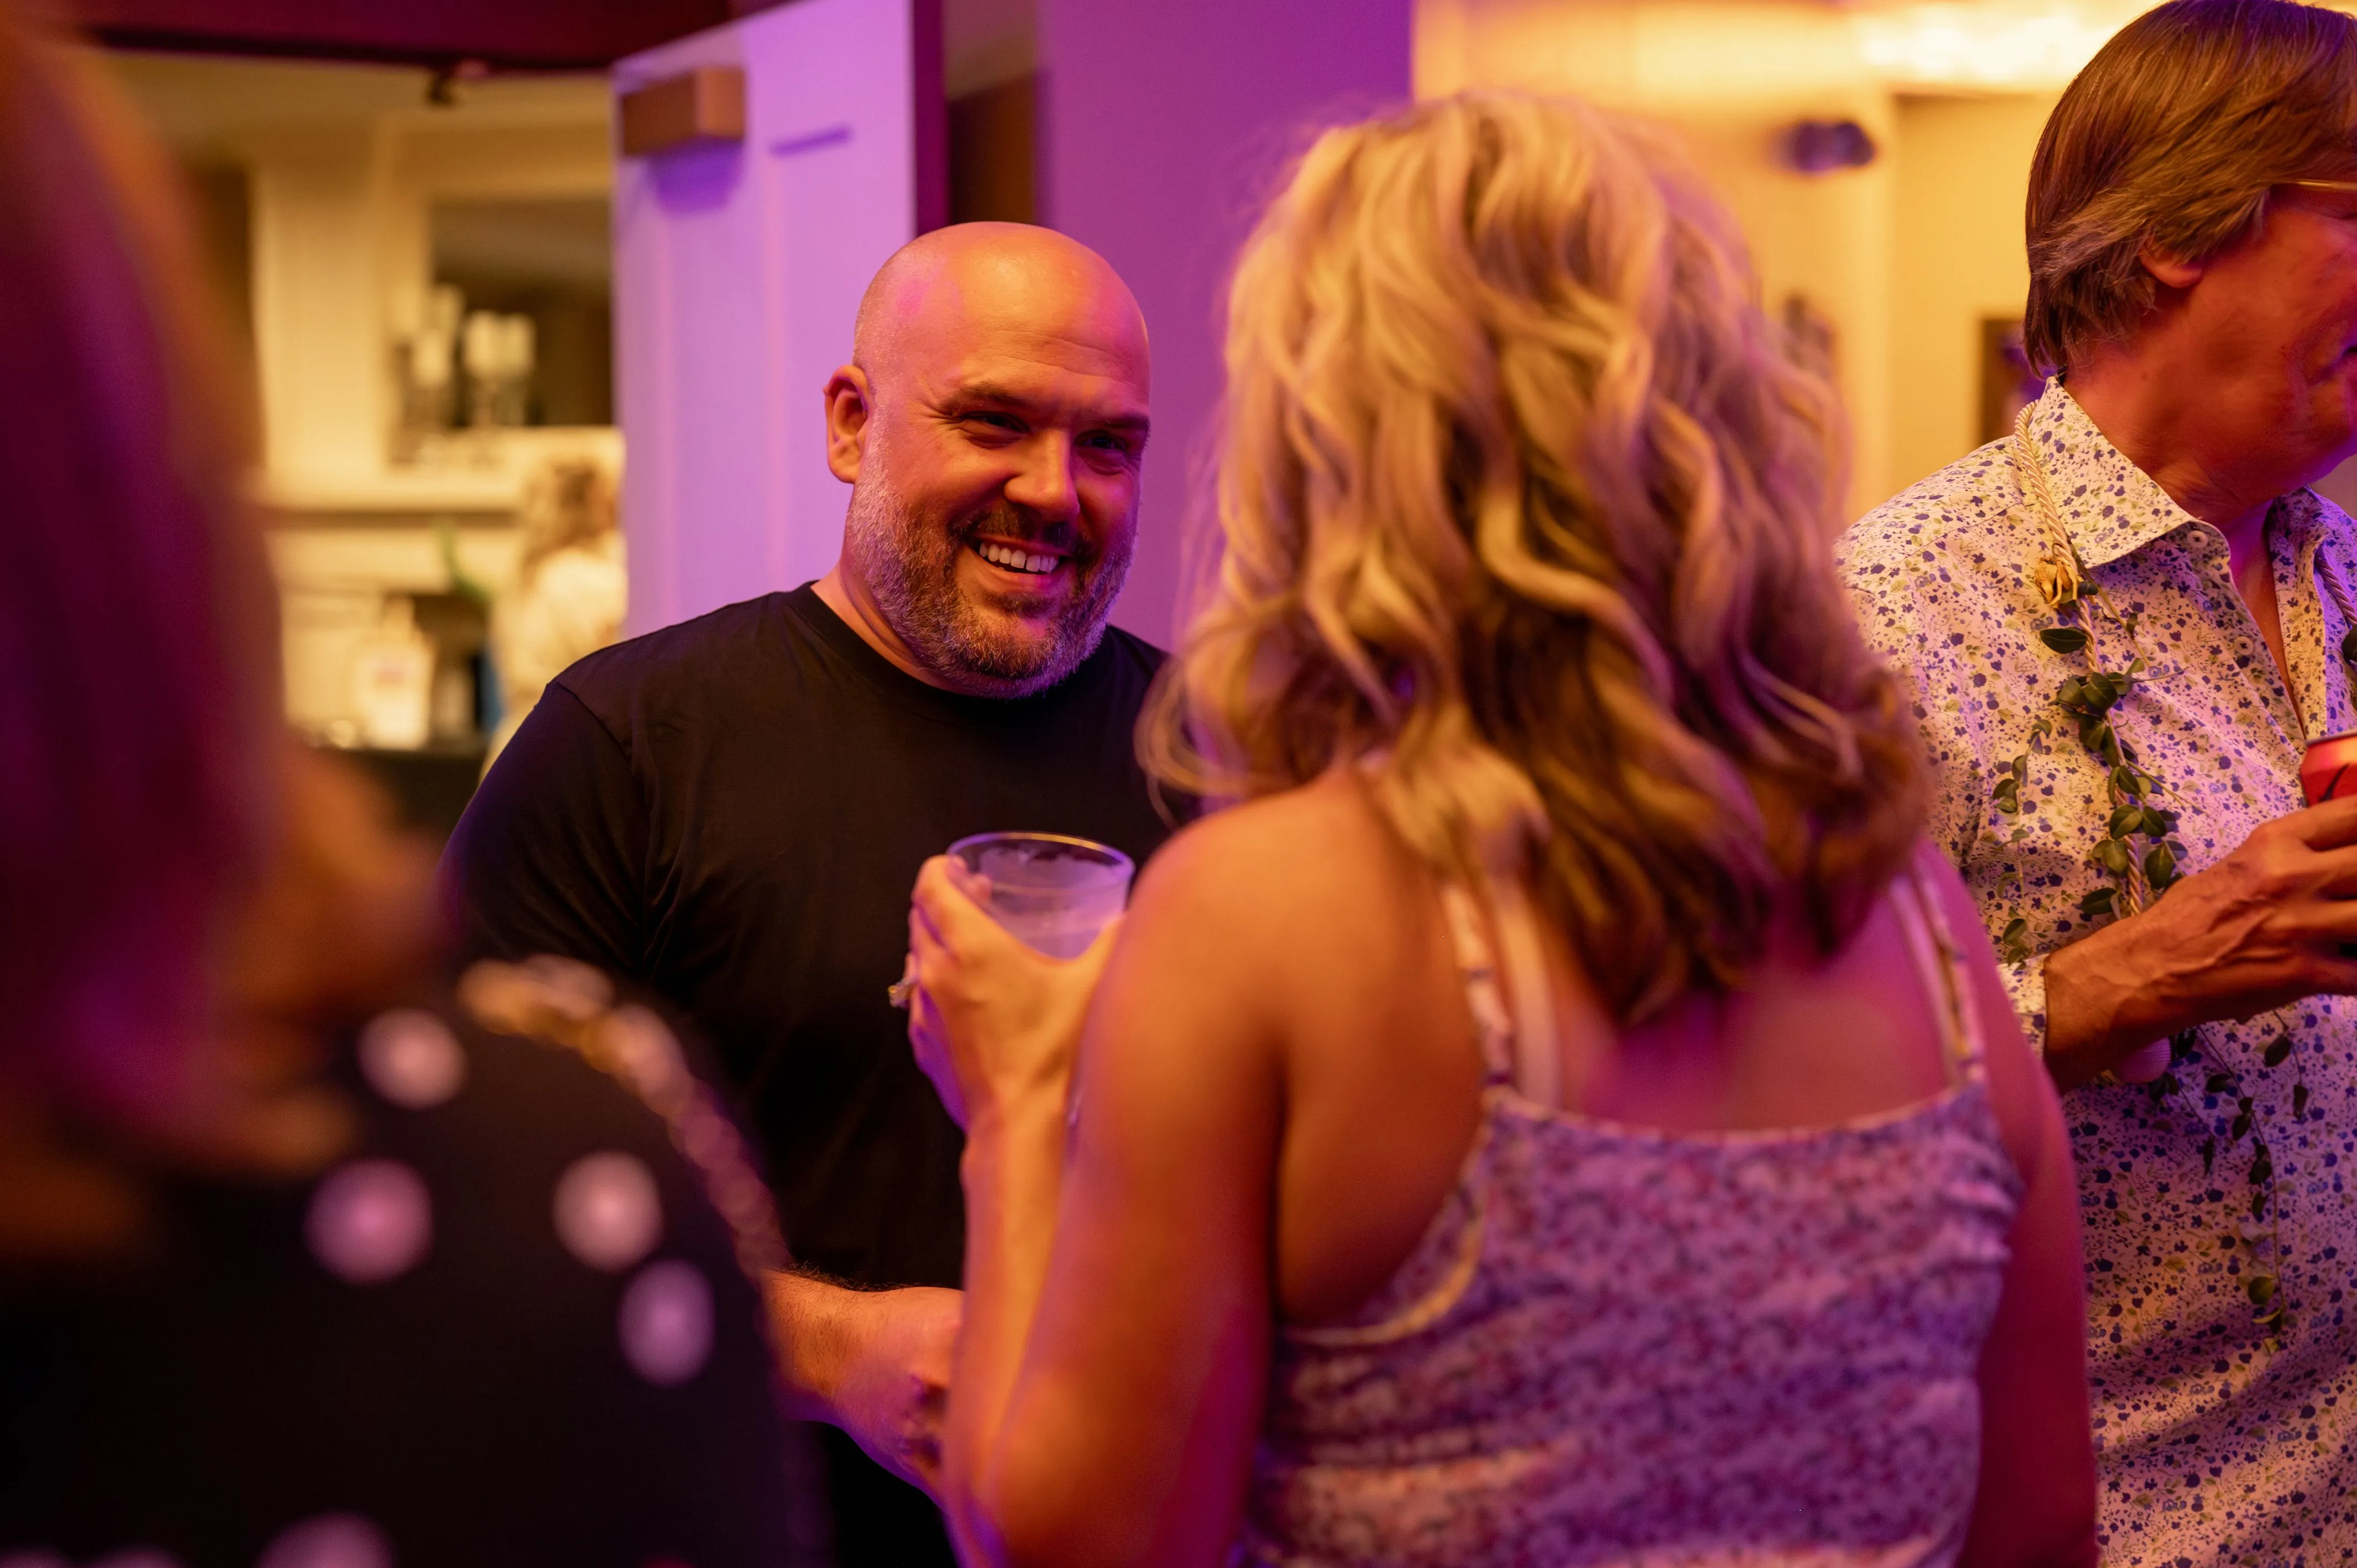 People socializing at an indoor gathering, with a smiling man holding a drink in focus.